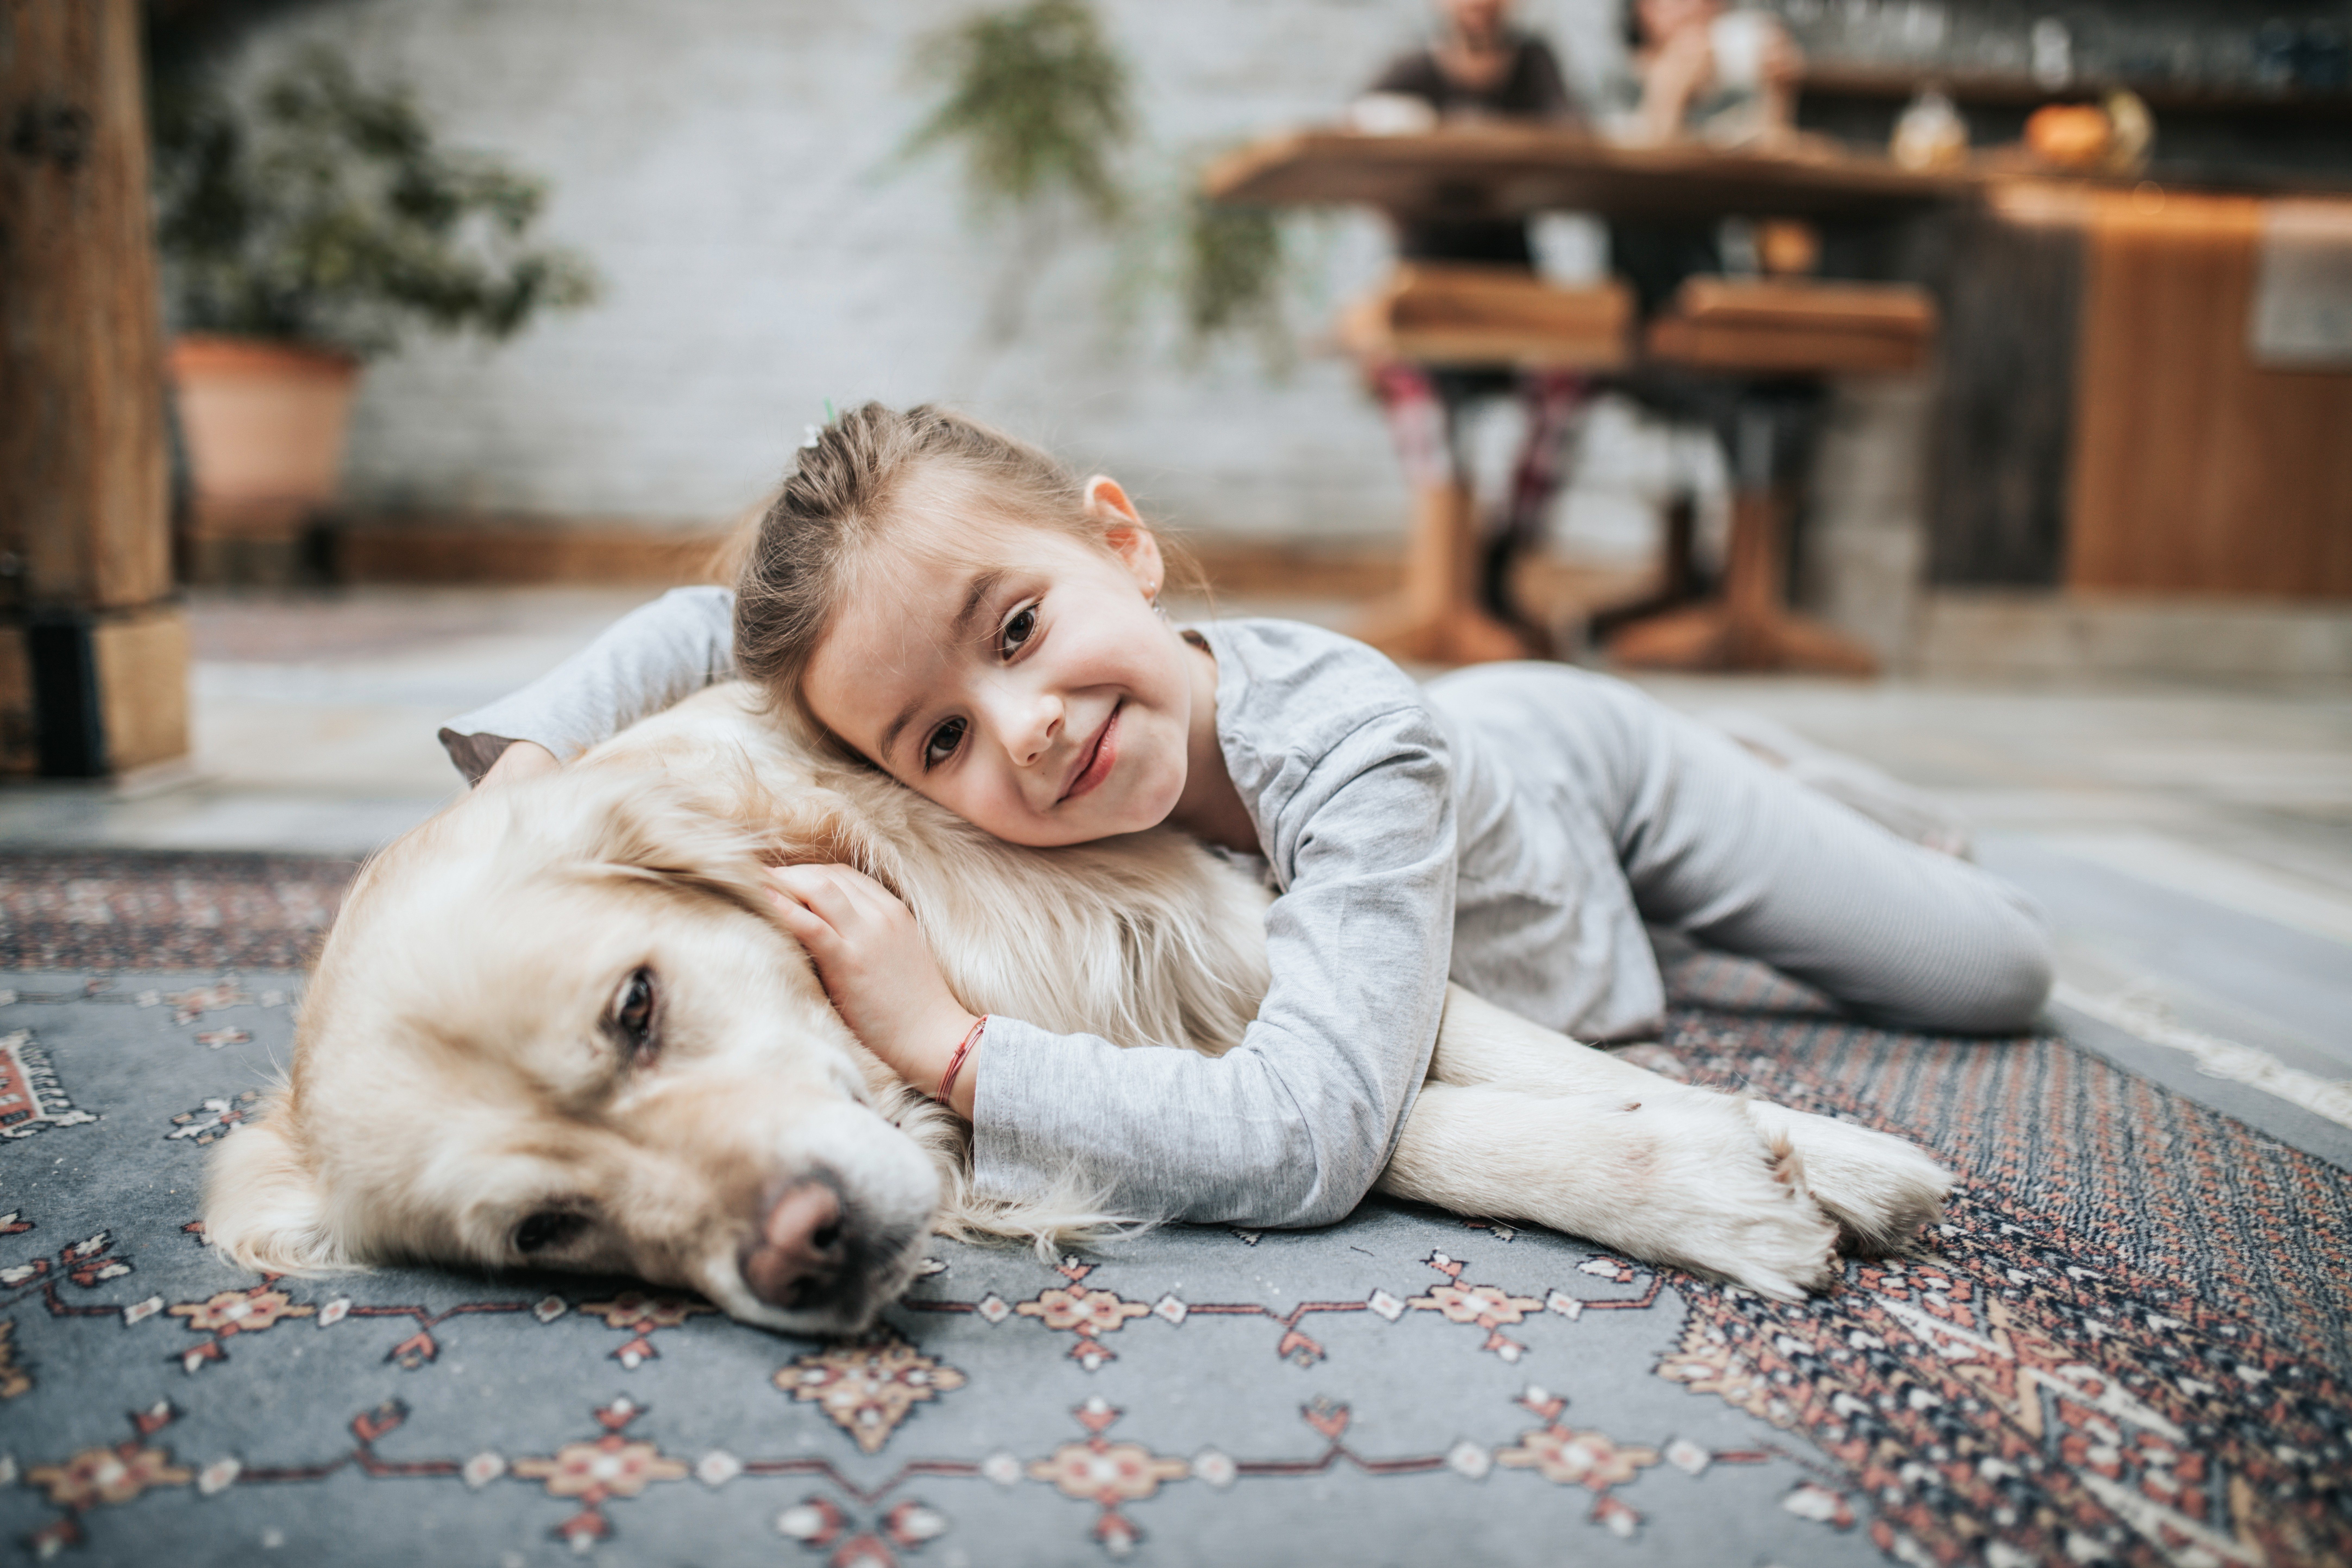 Smiling girl and her golden retriever on carpet at home.